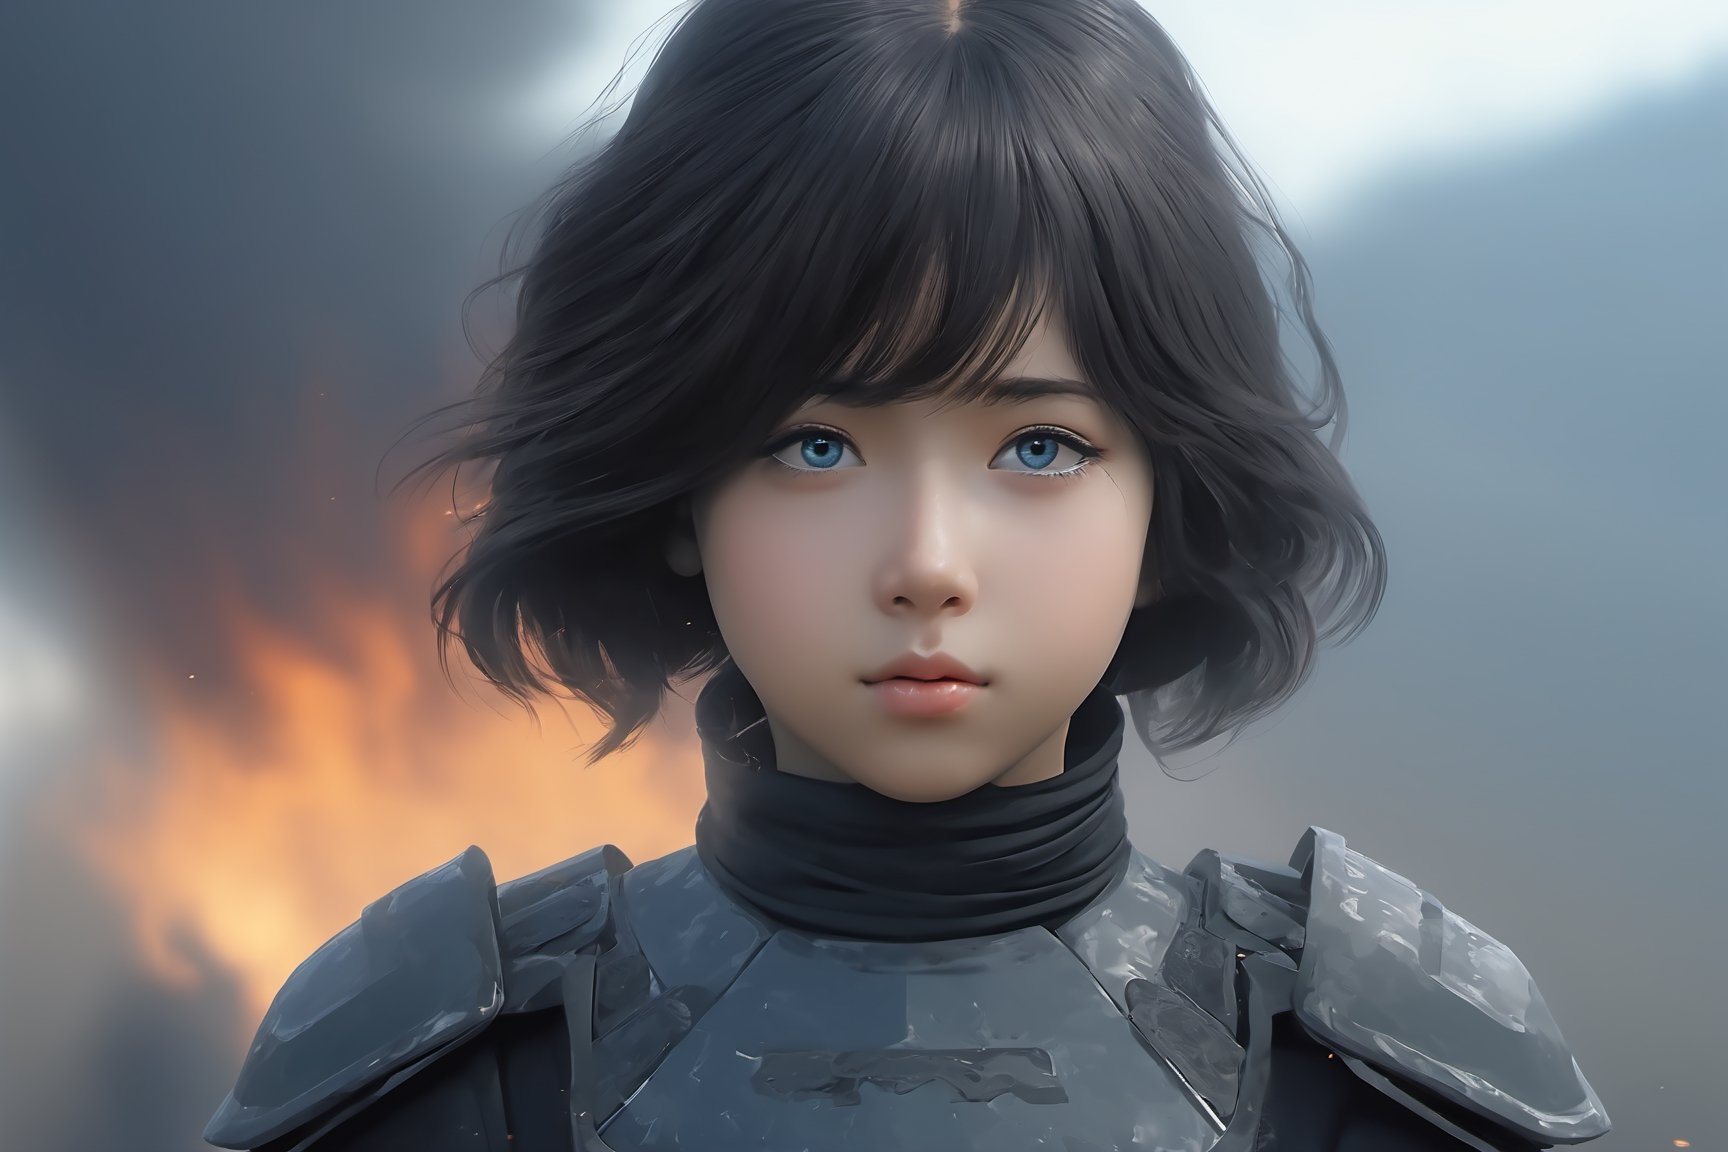 1girl, portrait, SWAT uniform((uniform detail like army force)) with super powerful arm, sidelighting, wallpaper, Masterpiece, 8k, battle field background, ruin all over the place, after deep impact by terrorist destroying attacted, The sky is obscured from the blue by flames, soot and battle fires are everywhere, and there is a hidden fire dragon in the background 
Wide angle shot, half length, photography,
8k, ultra realistic, Rim light, Perfect face, small face, small head, (beautiful detailed eyes, symmetrical eyes, (detailed face), slender, dramatic lighting, (8k, photo, masterpiece), (highest quality), (best shadow), (best illustration), ultra high resolution, 8K wallpapers, physically based rendering, photo, realistic, realism, high contrast,. anime_screencap,IncrsXLRanni,A girl in the wild 